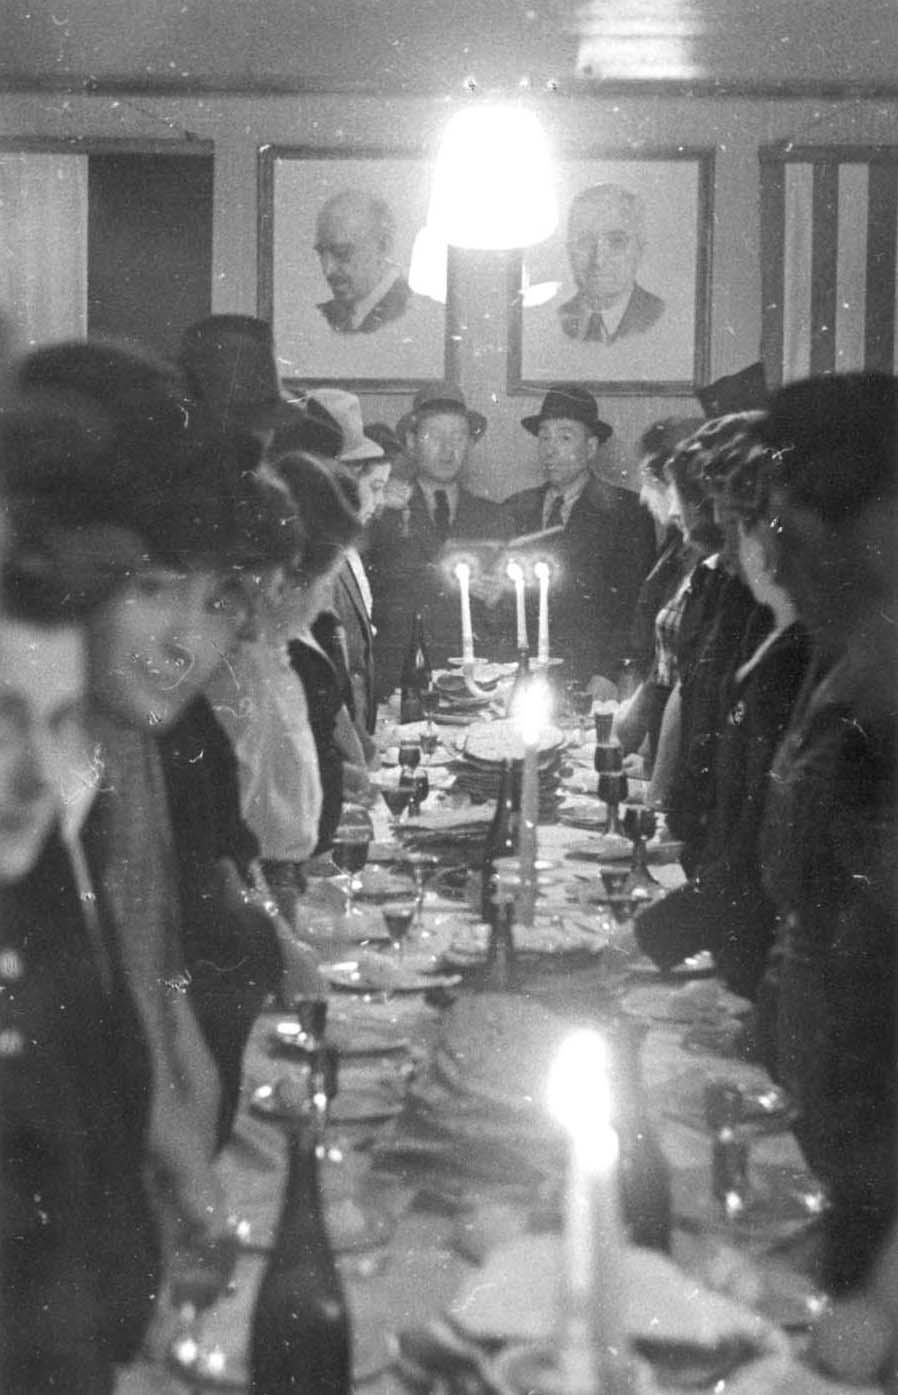 A Passover Seder at the Selb DP camp, Germany, 09/04/1946